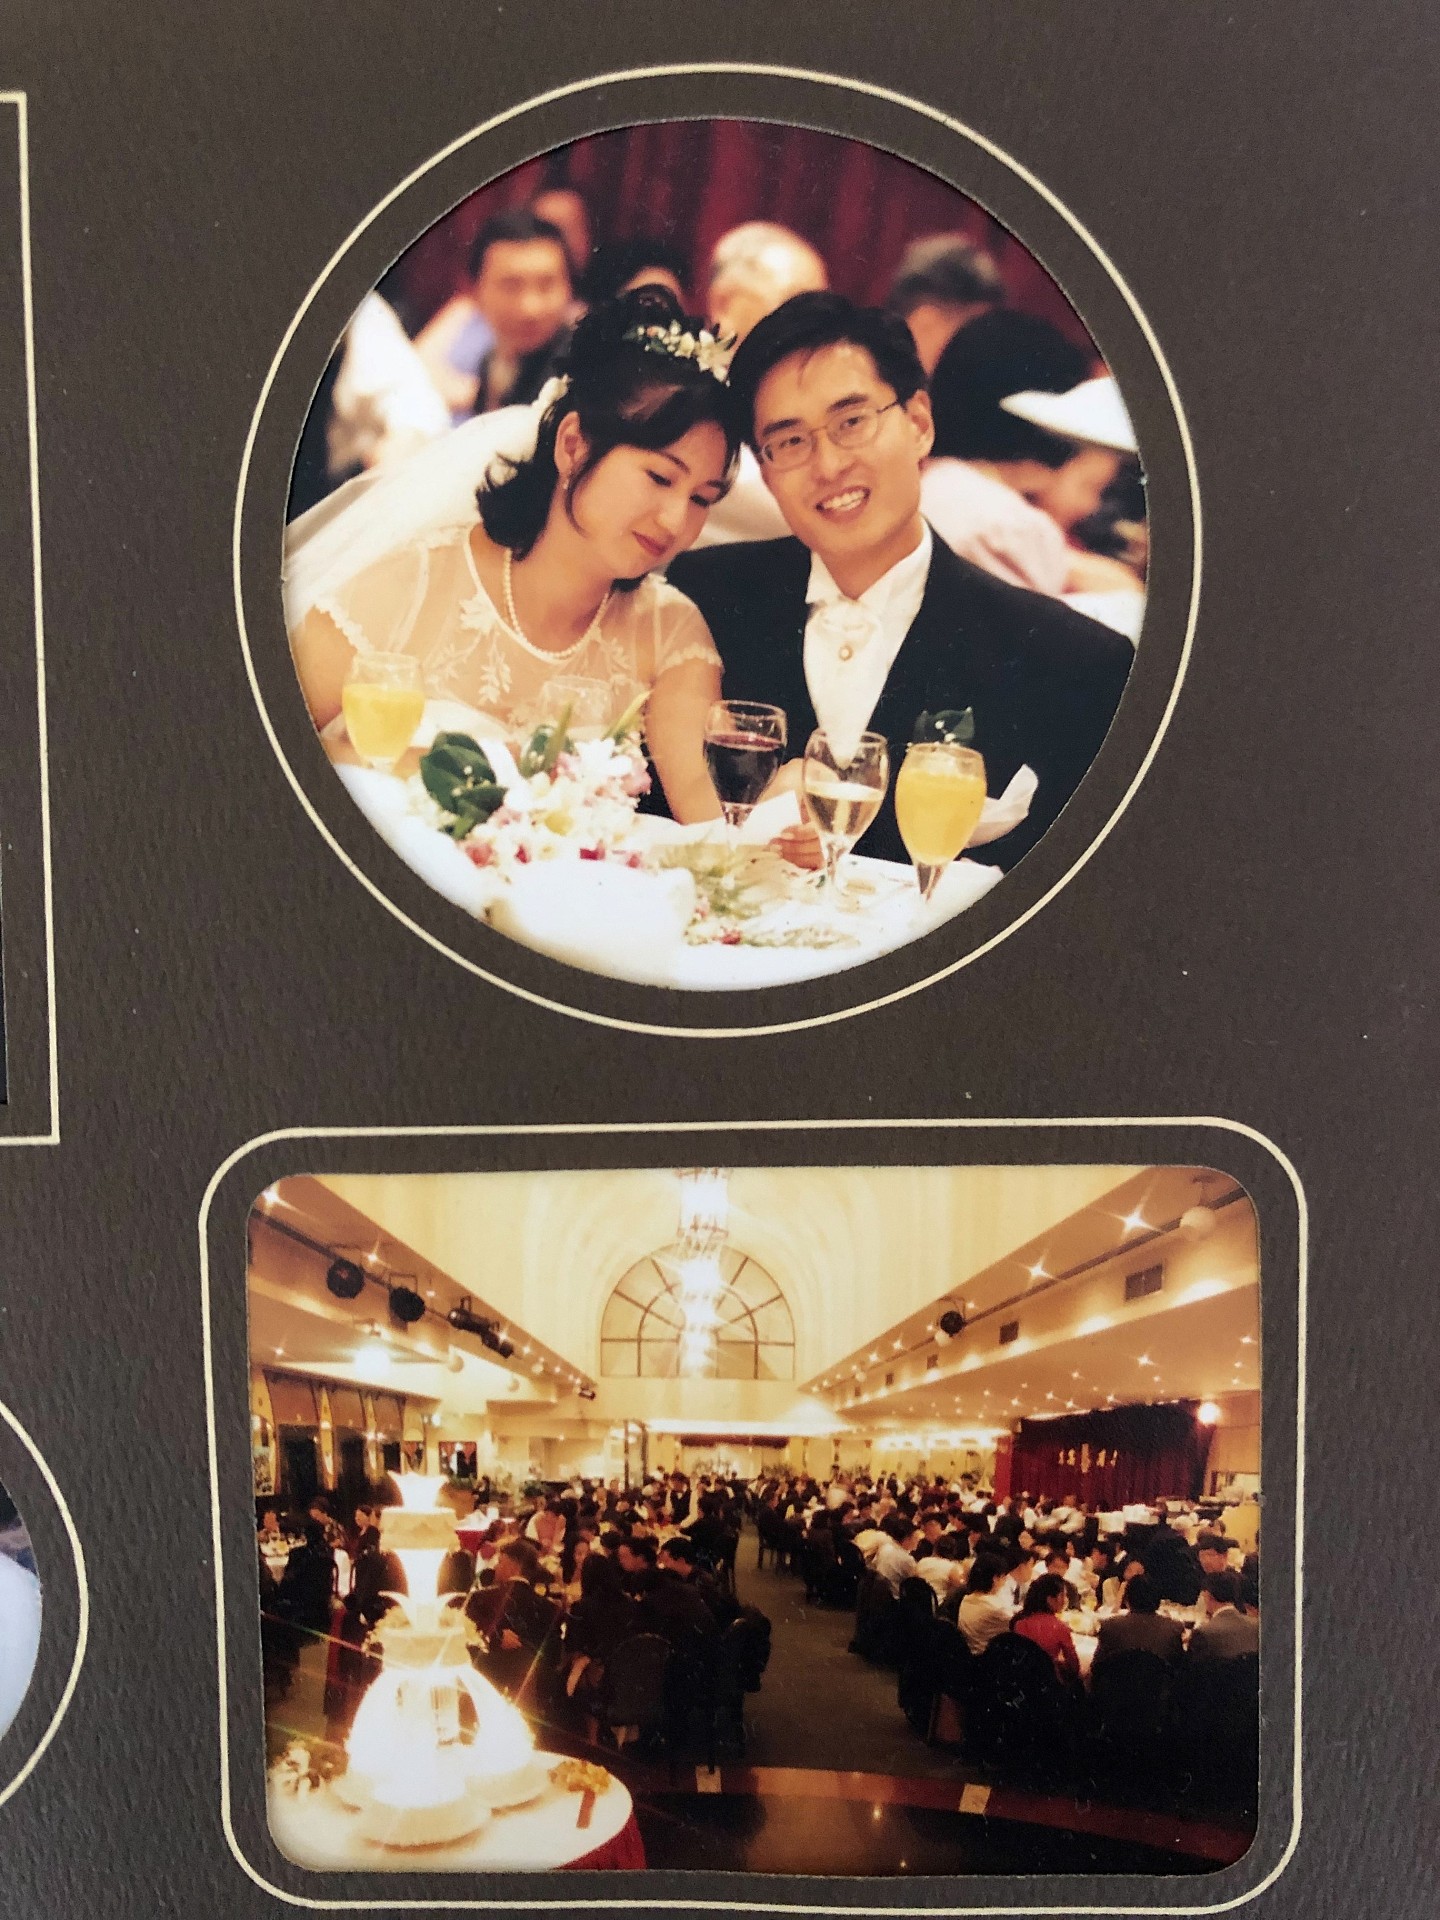 The photos of a married Asian couple and wedding reception.